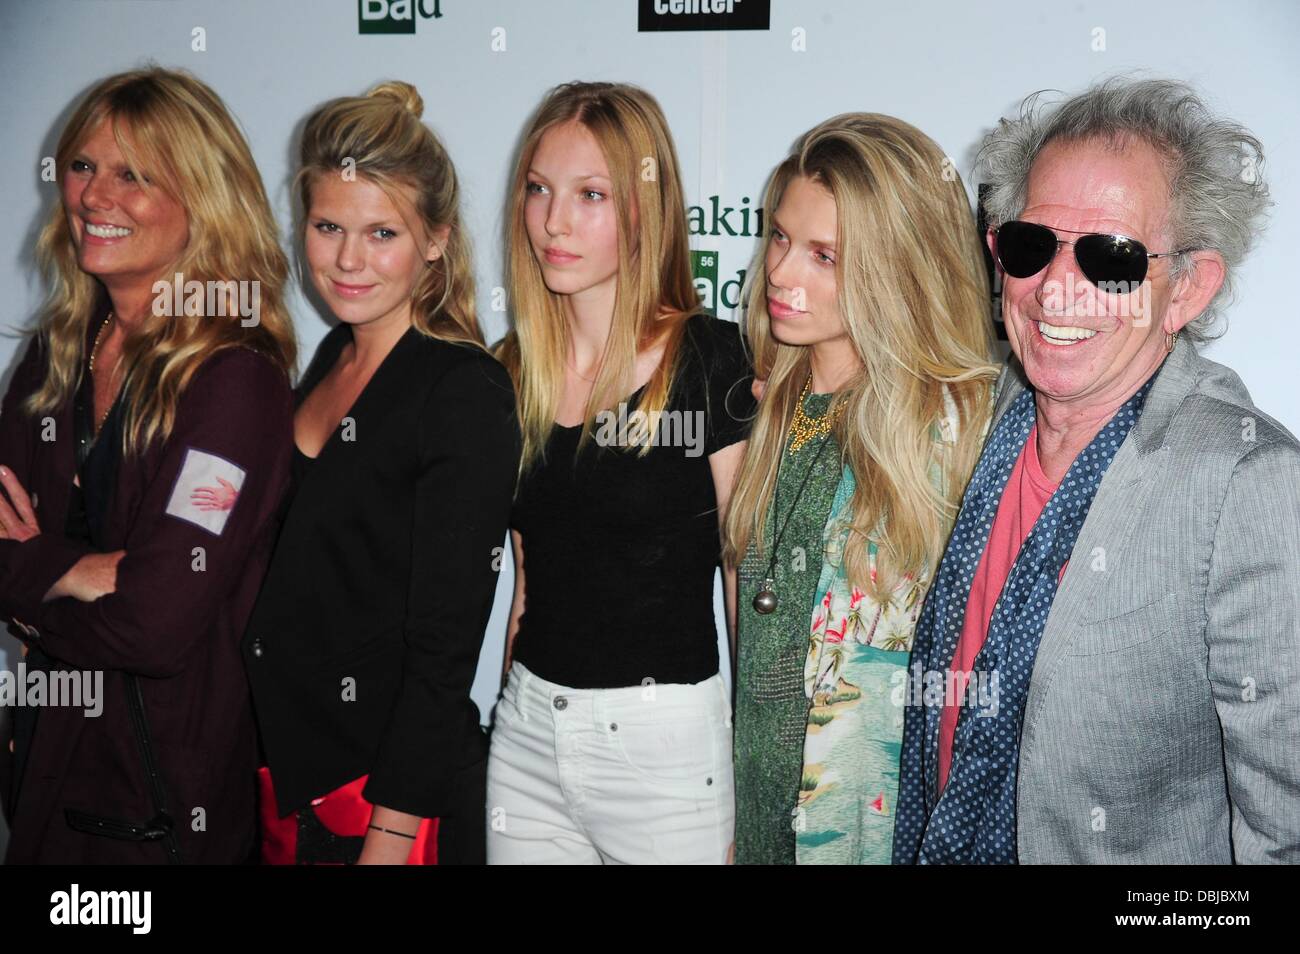 New York, NY. 31st July, 2013. Patti Hansen, Alexandra Richards, Ella Richards, Theodora Richards, Keith Richards at arrivals for The Film Society of Lincoln Center and AMC's BREAKING BAD Final Episodes Special Premiere, Walter Reade Theater, New York, NY July 31, 2013. Credit:  Gregorio T. Binuya/Everett Collection/Alamy Live News Stock Photo